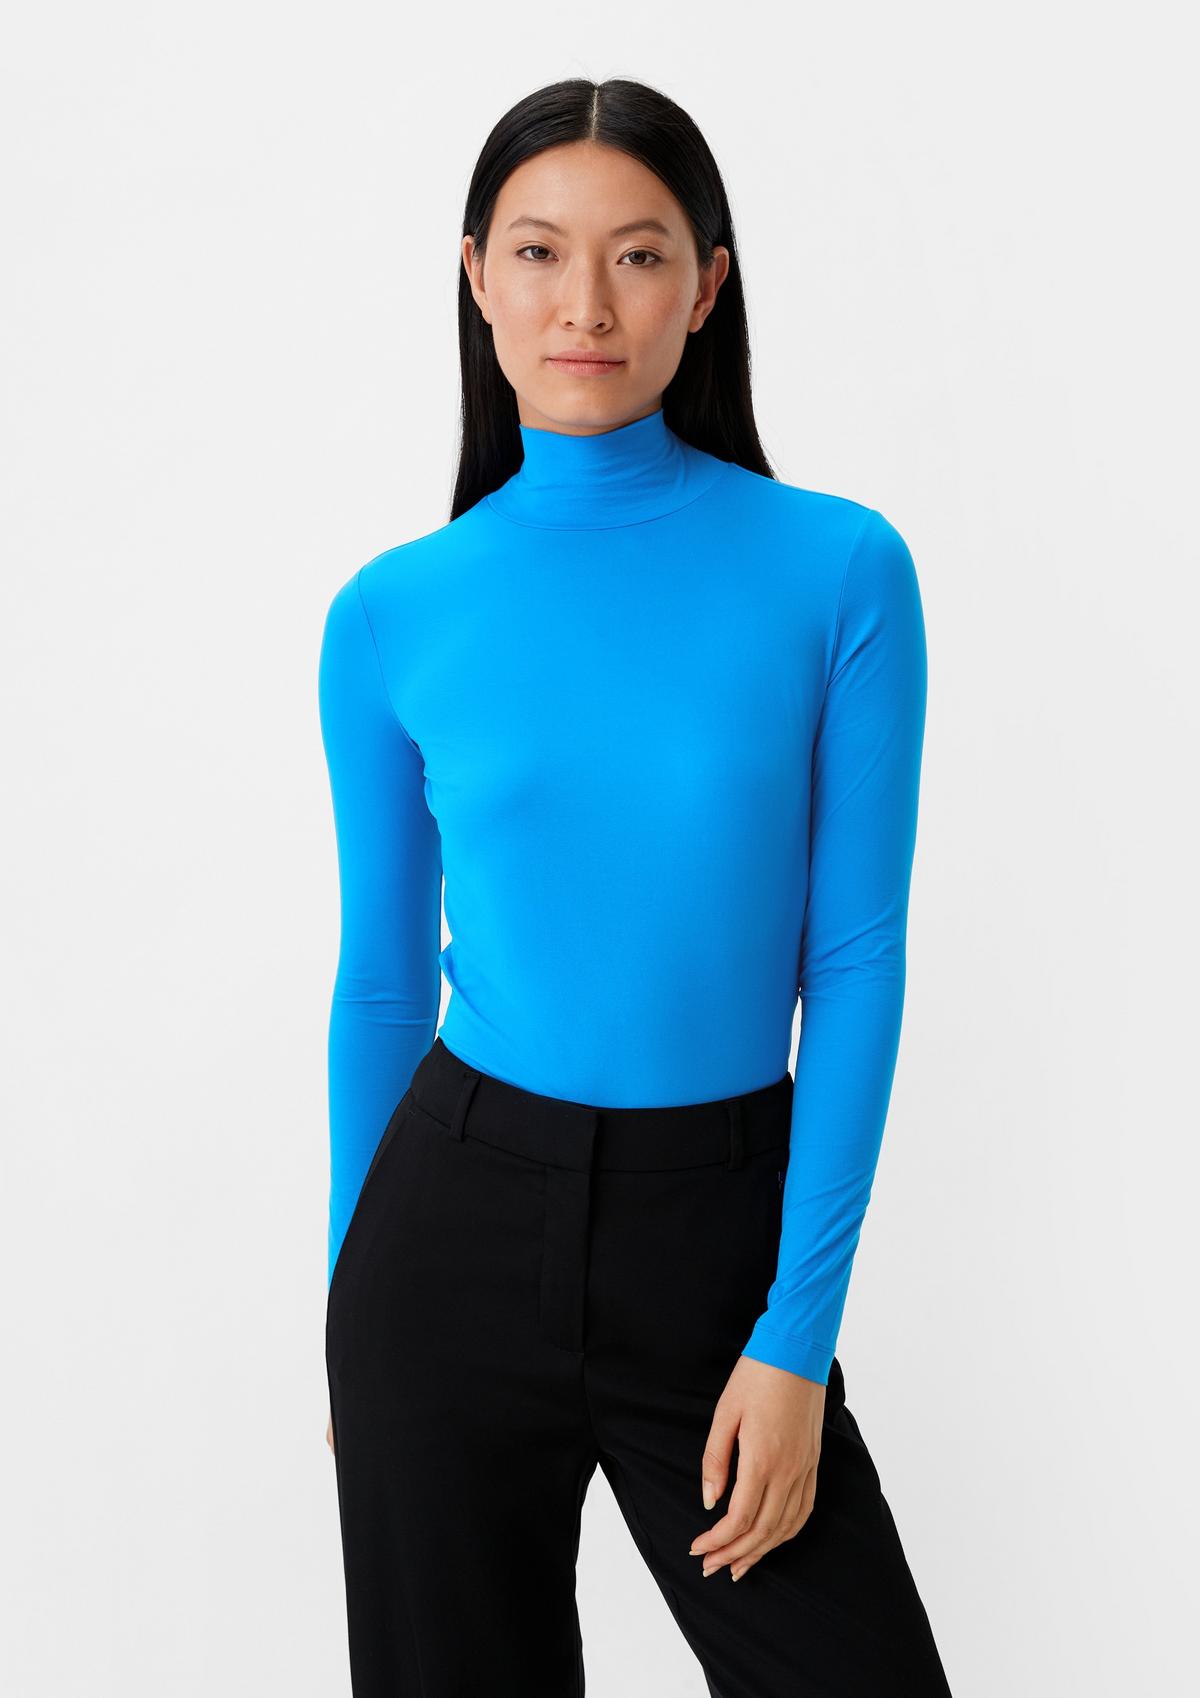 comma Thin long sleeve jersey top